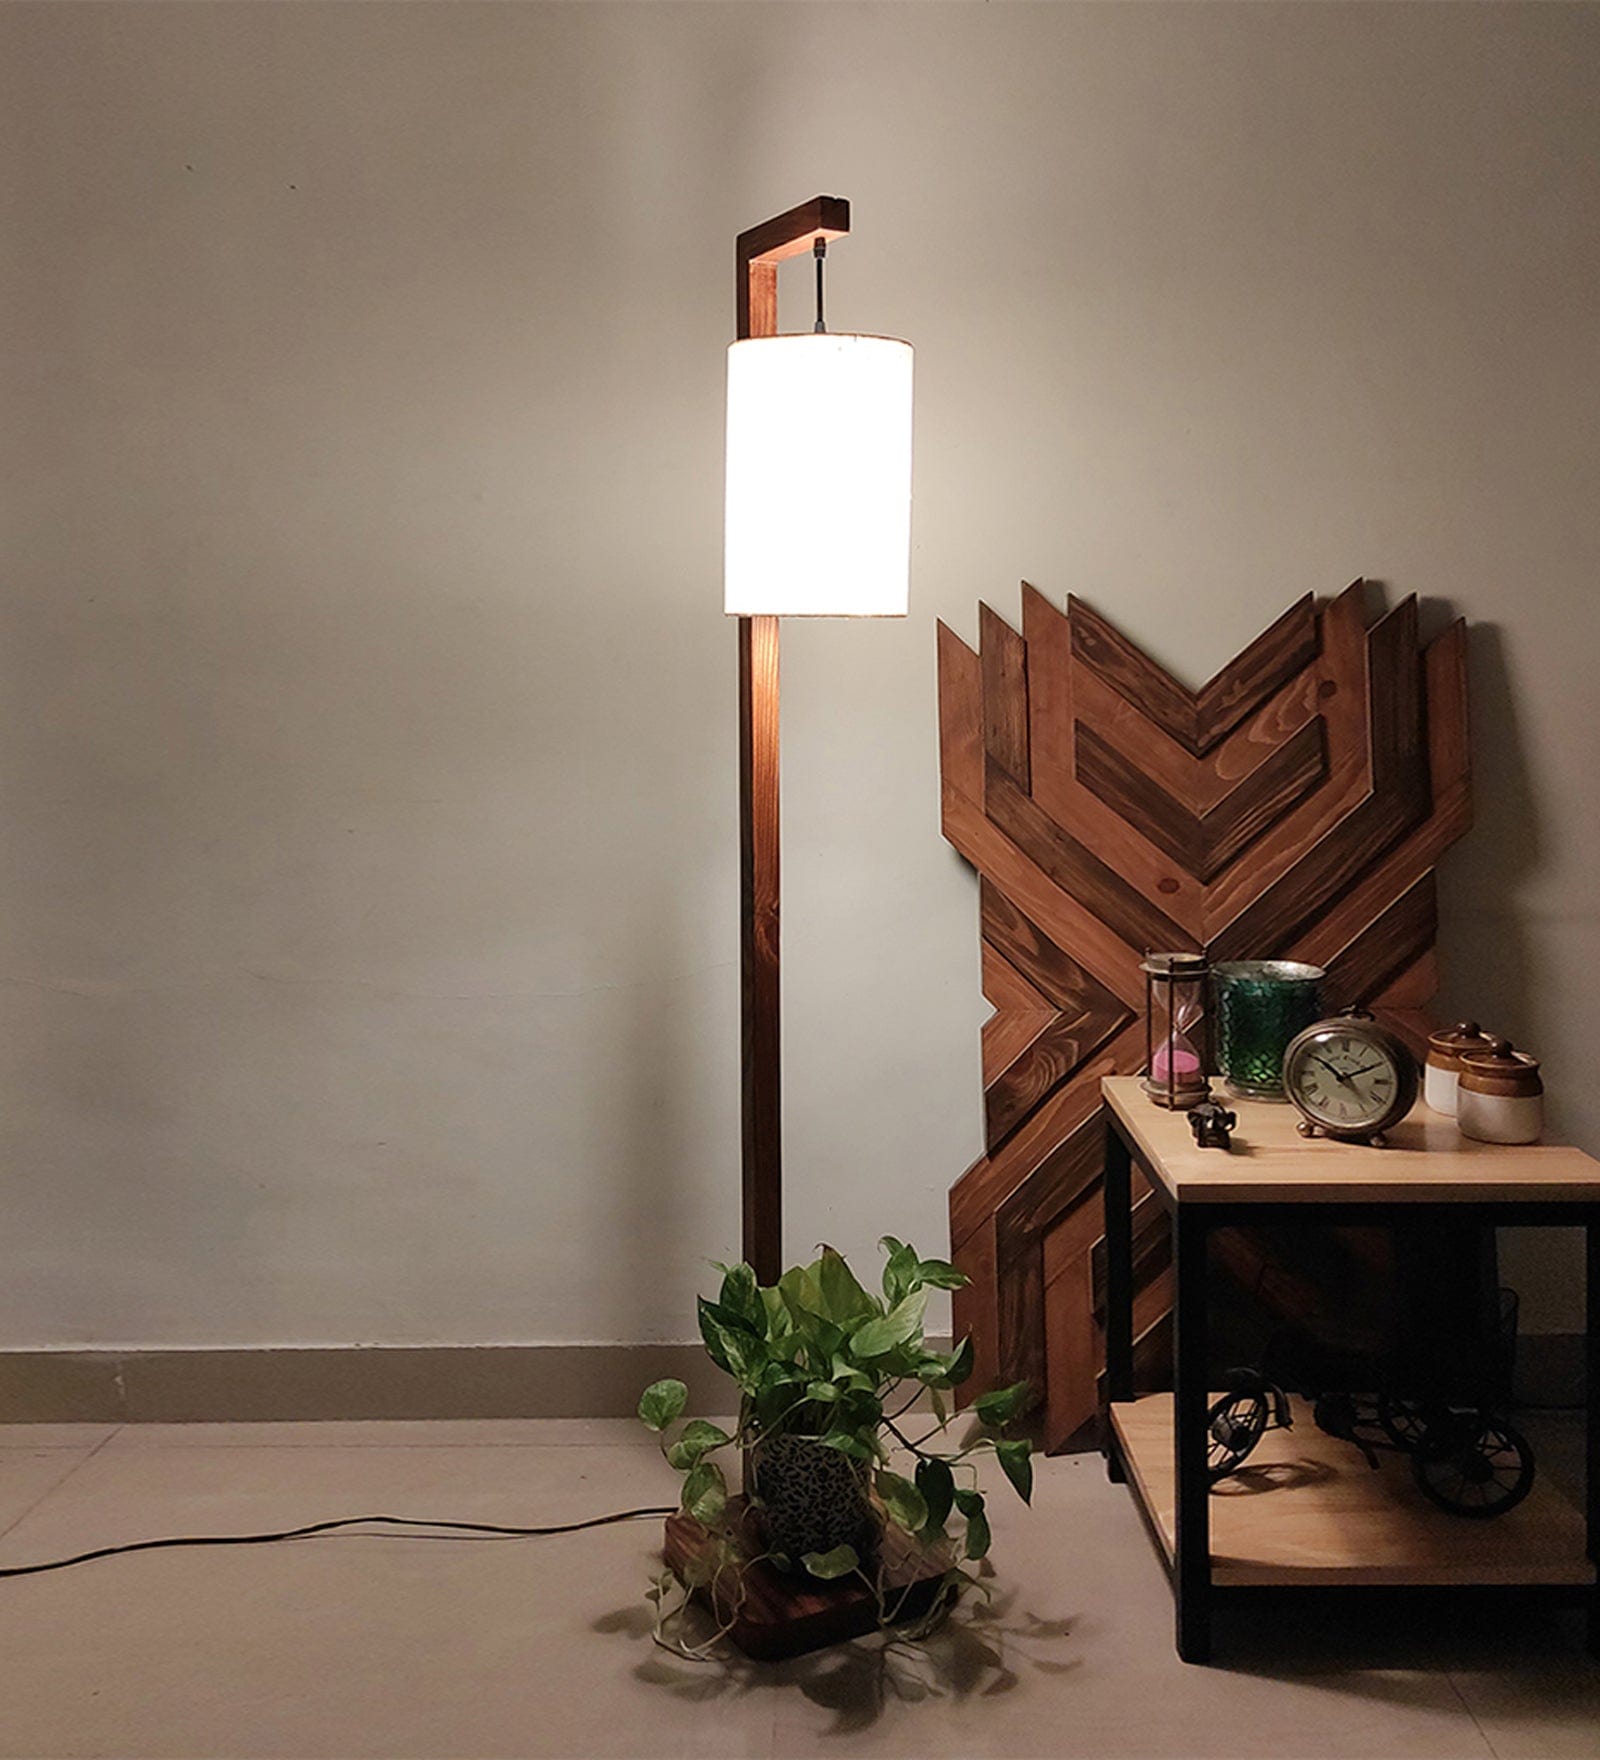 Elementary Wooden Floor Lamp with Brown Base and White Fabric Lampshade (BULB NOT INCLUDED)